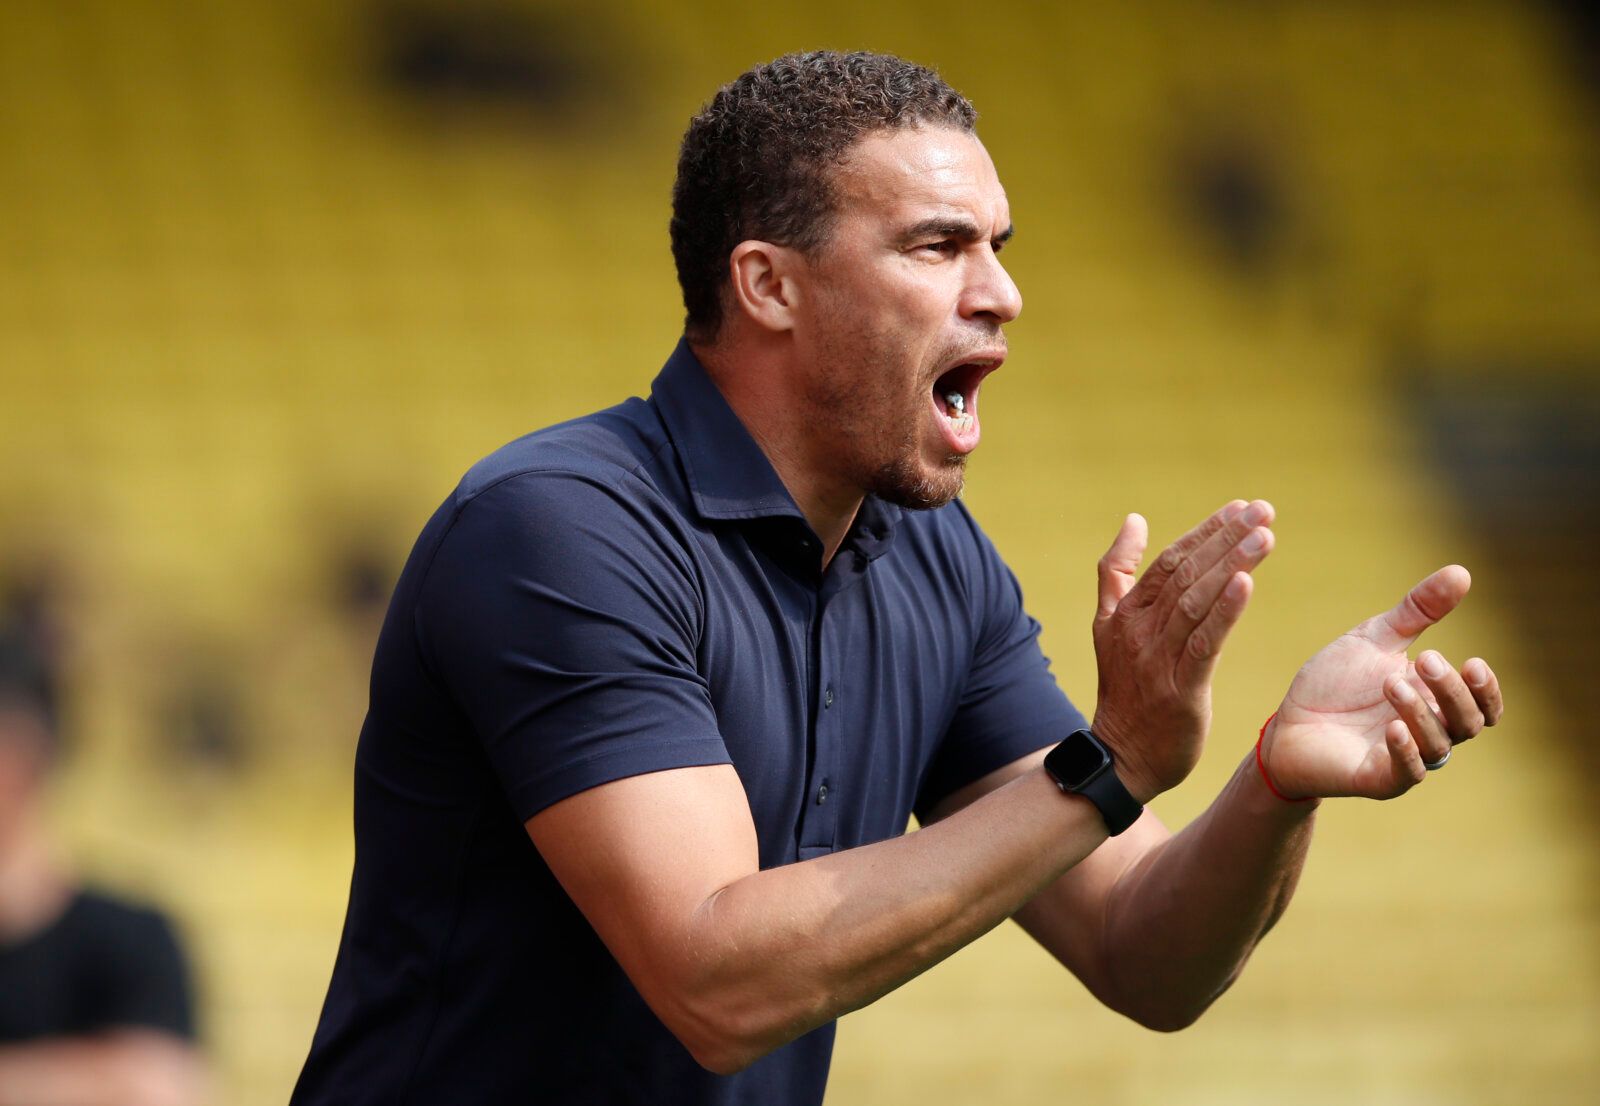 Soccer Football - Pre Season Friendly - Watford v West Bromwich Albion - Vicarage Road, Watford, Britain - July 24, 2021 West Bromwich Albion manager Valerien Ismael Action Images via Reuters/Paul Childs